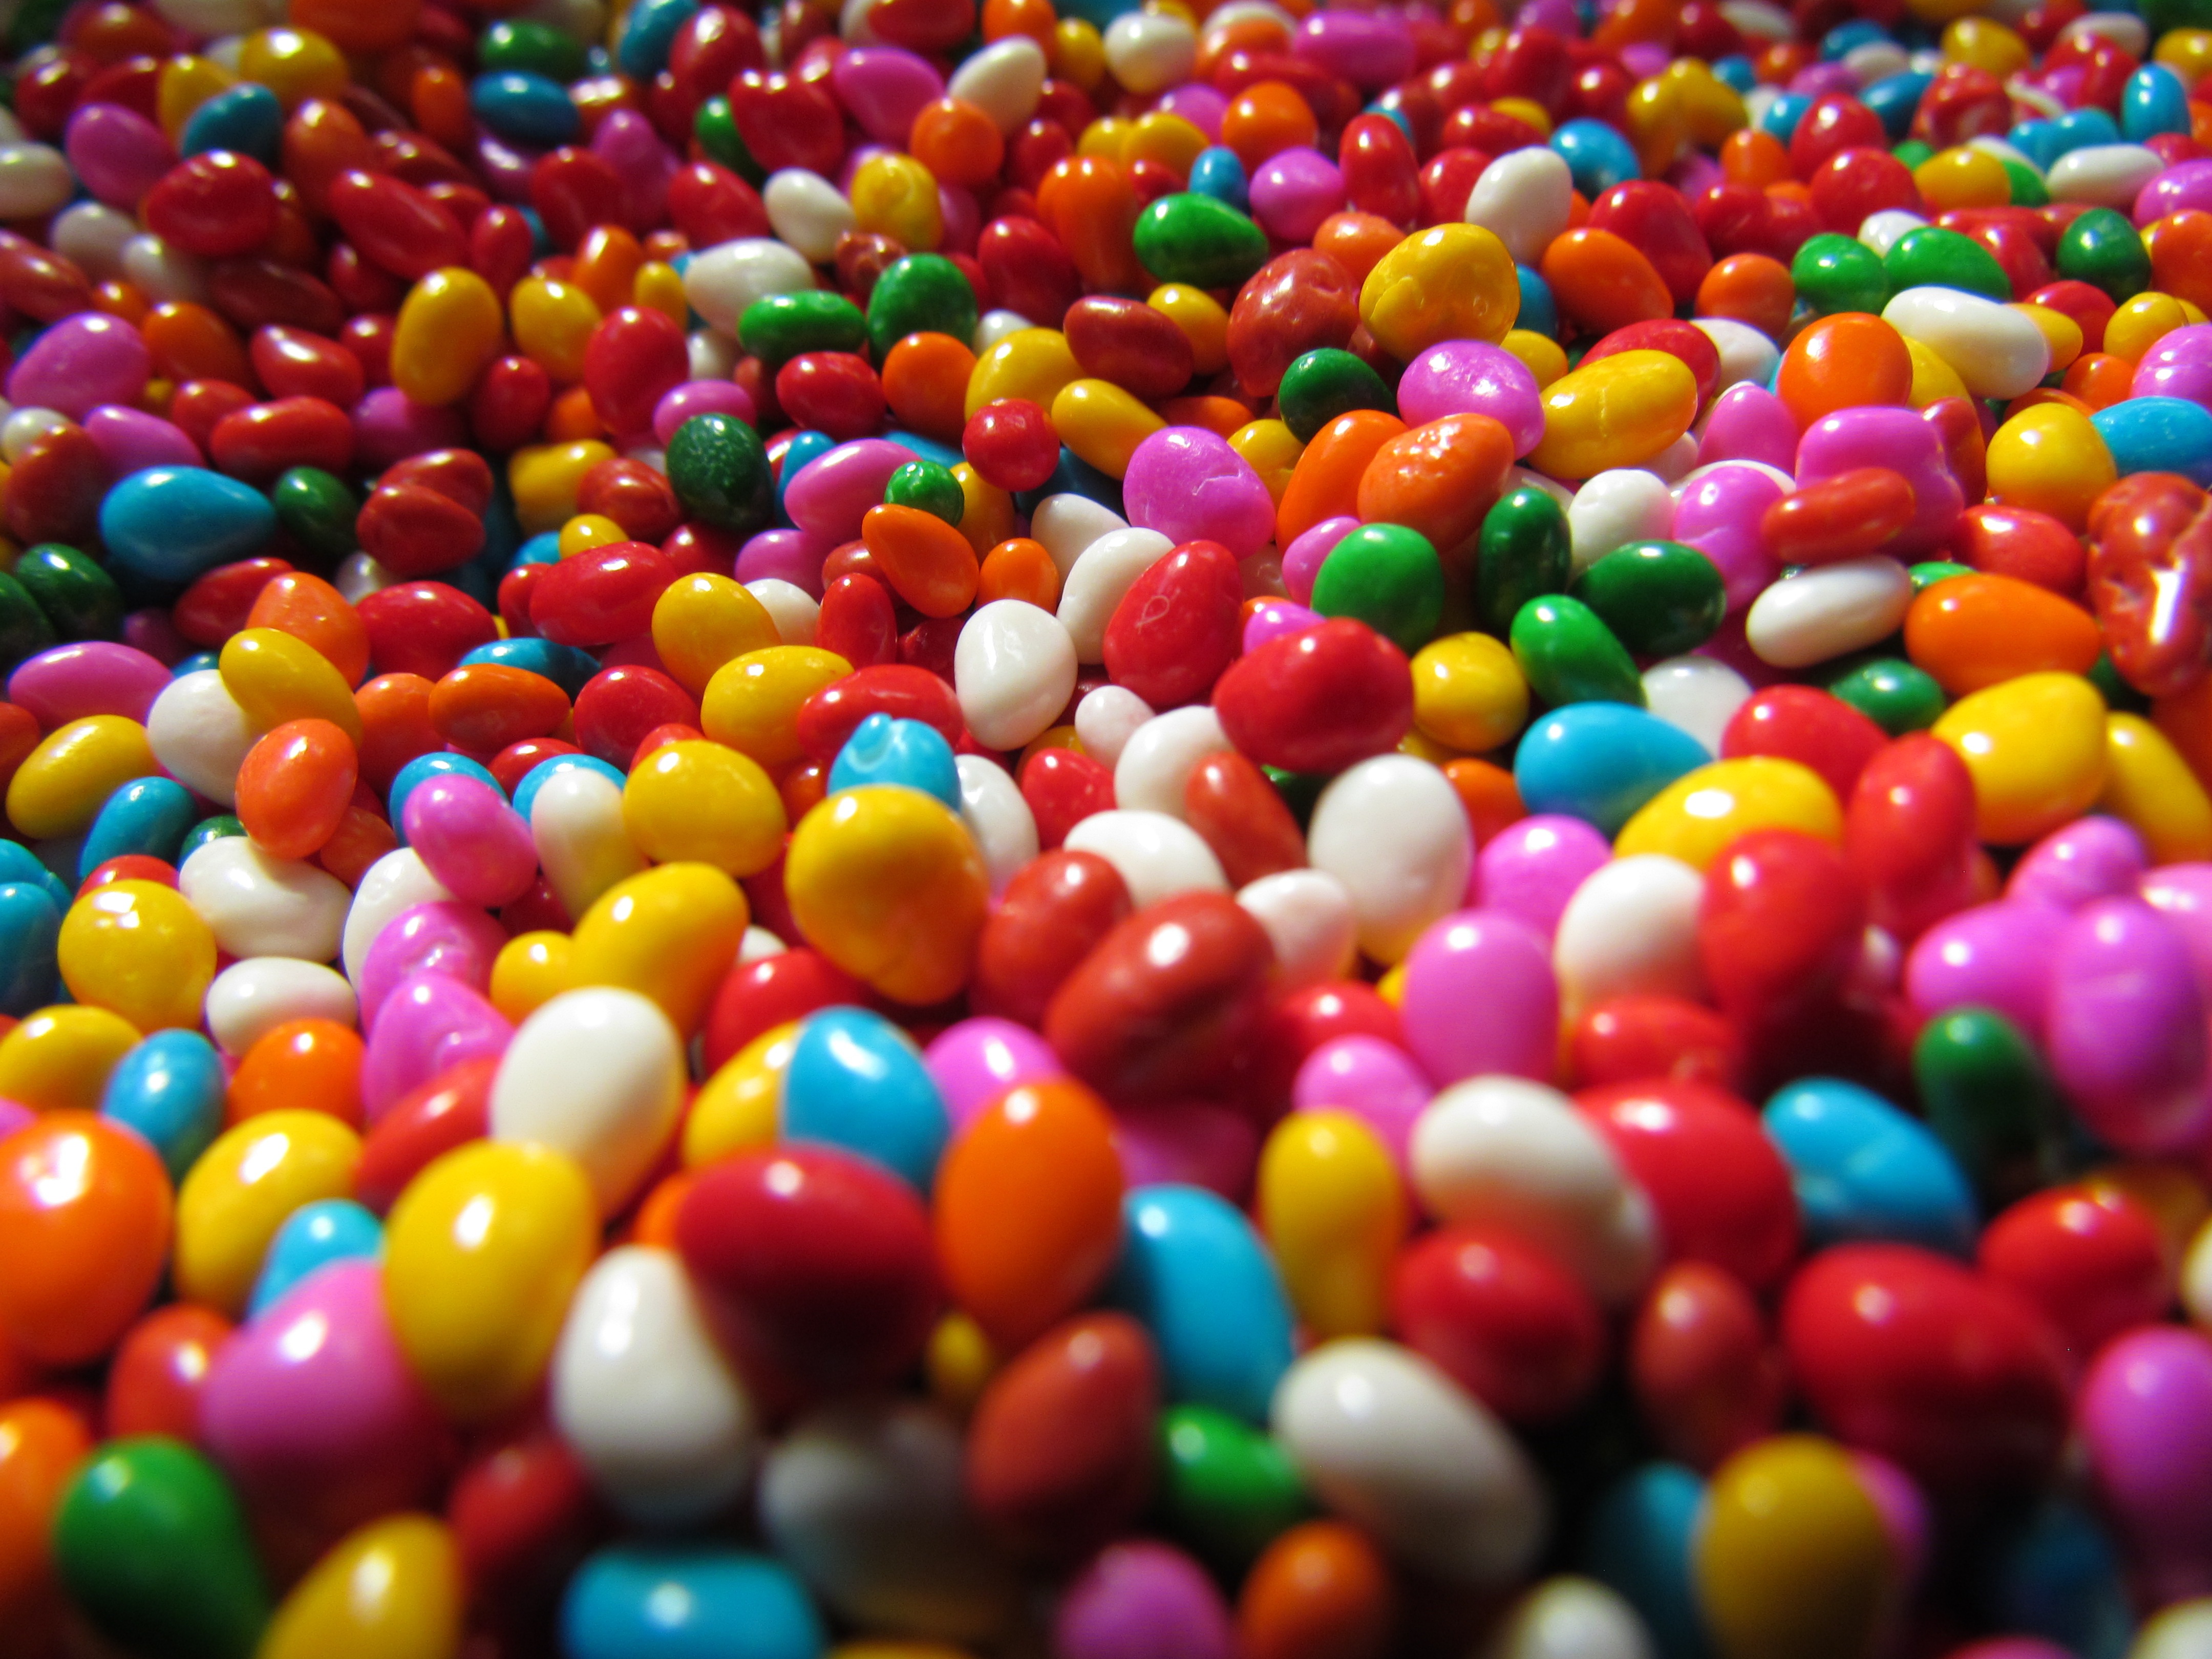 bright, motley, multicolored, food, candies Full HD